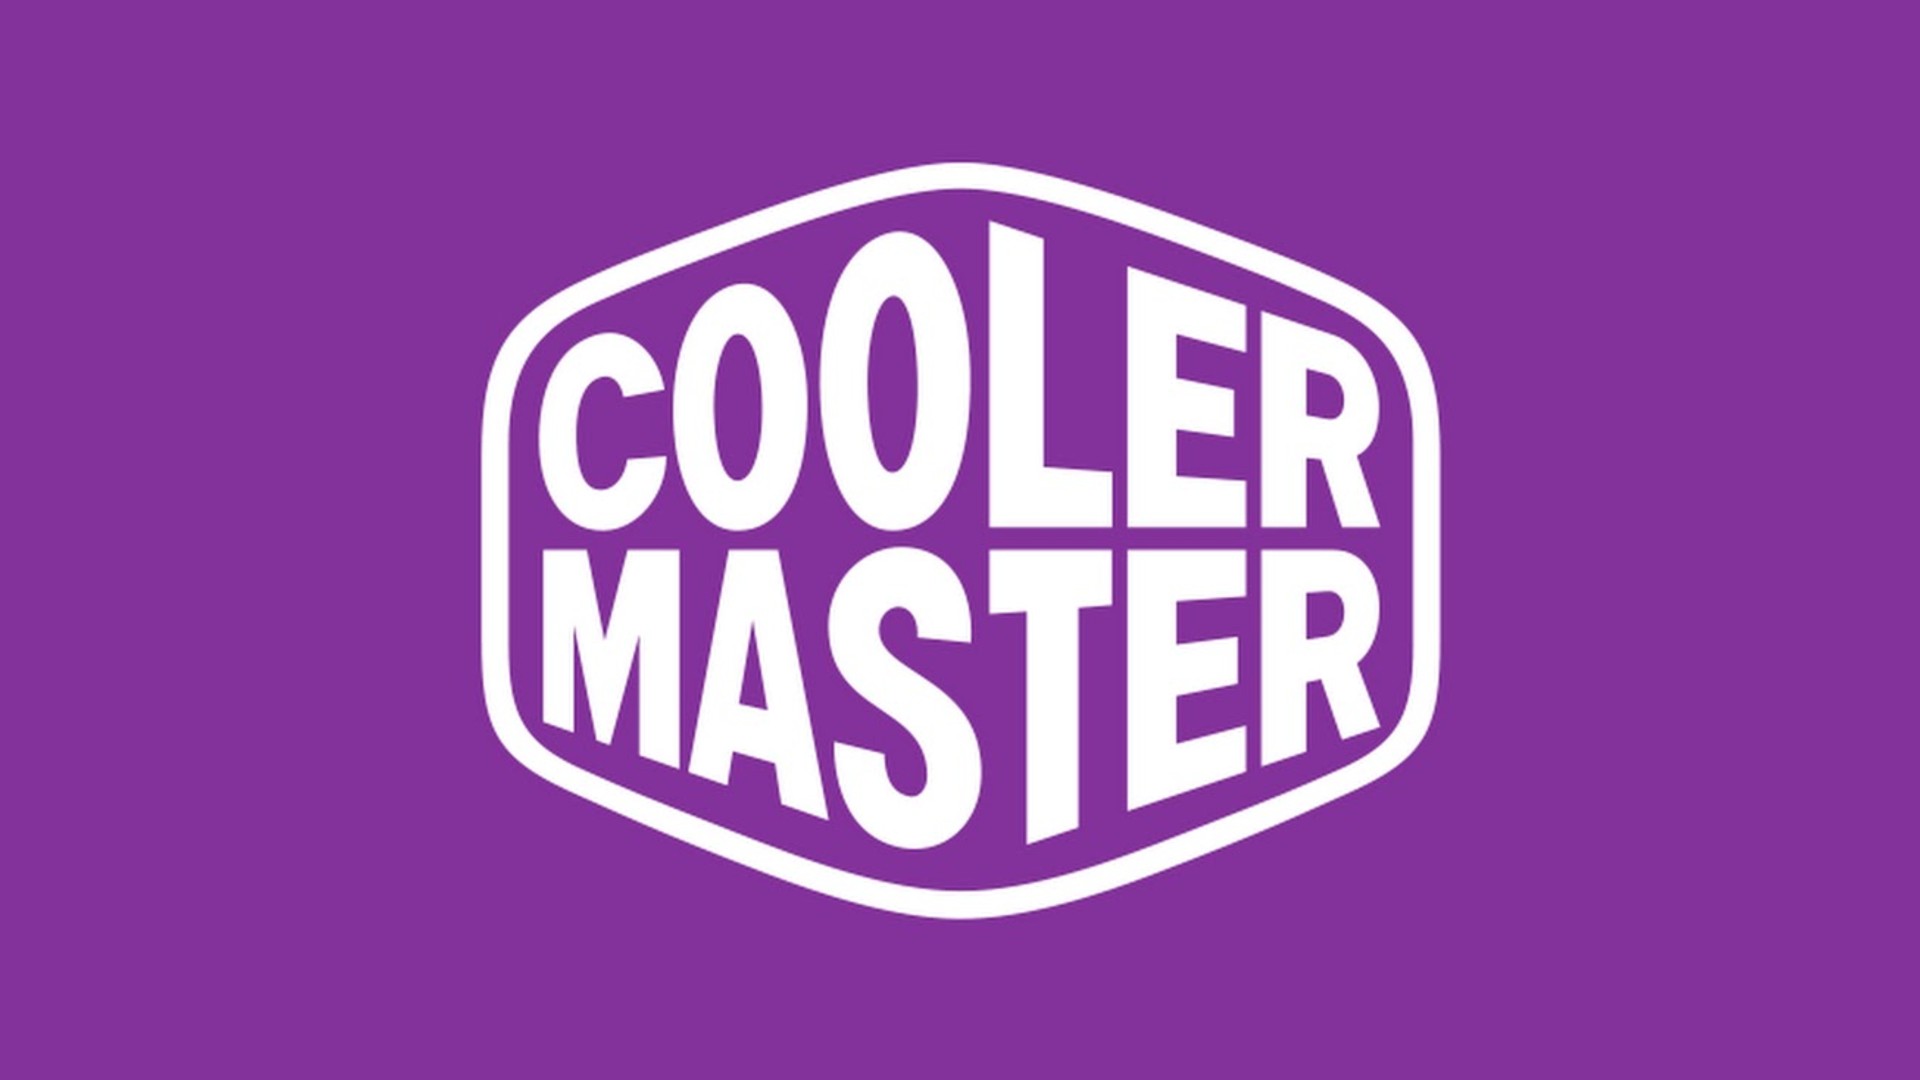 Cooler Master wants to charge you $2,000 for a vibrating gaming chair